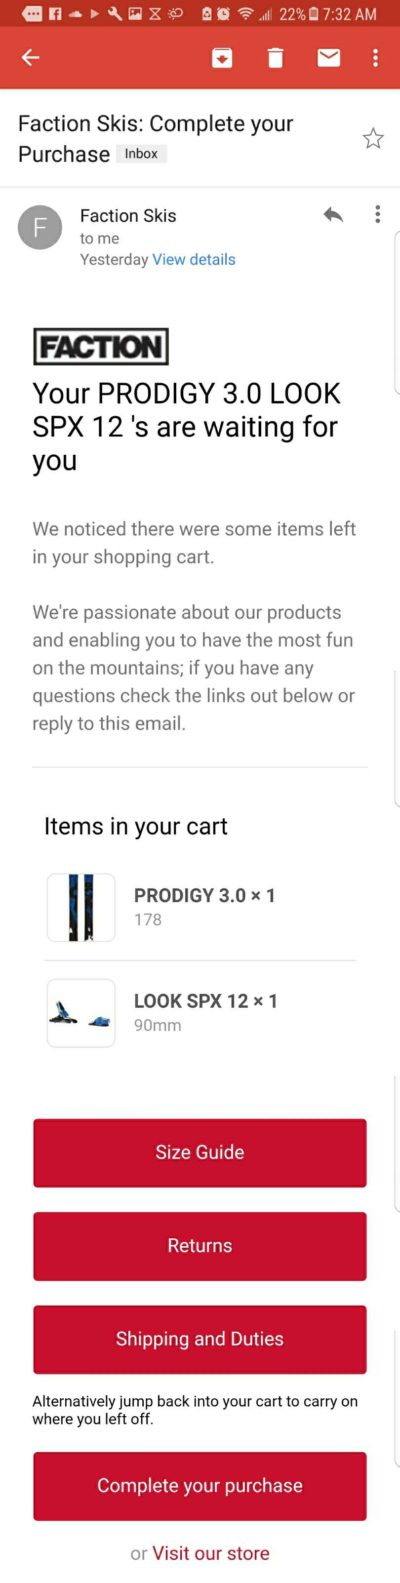 Faction Ski's Abandoned Cart Recovery Email Template